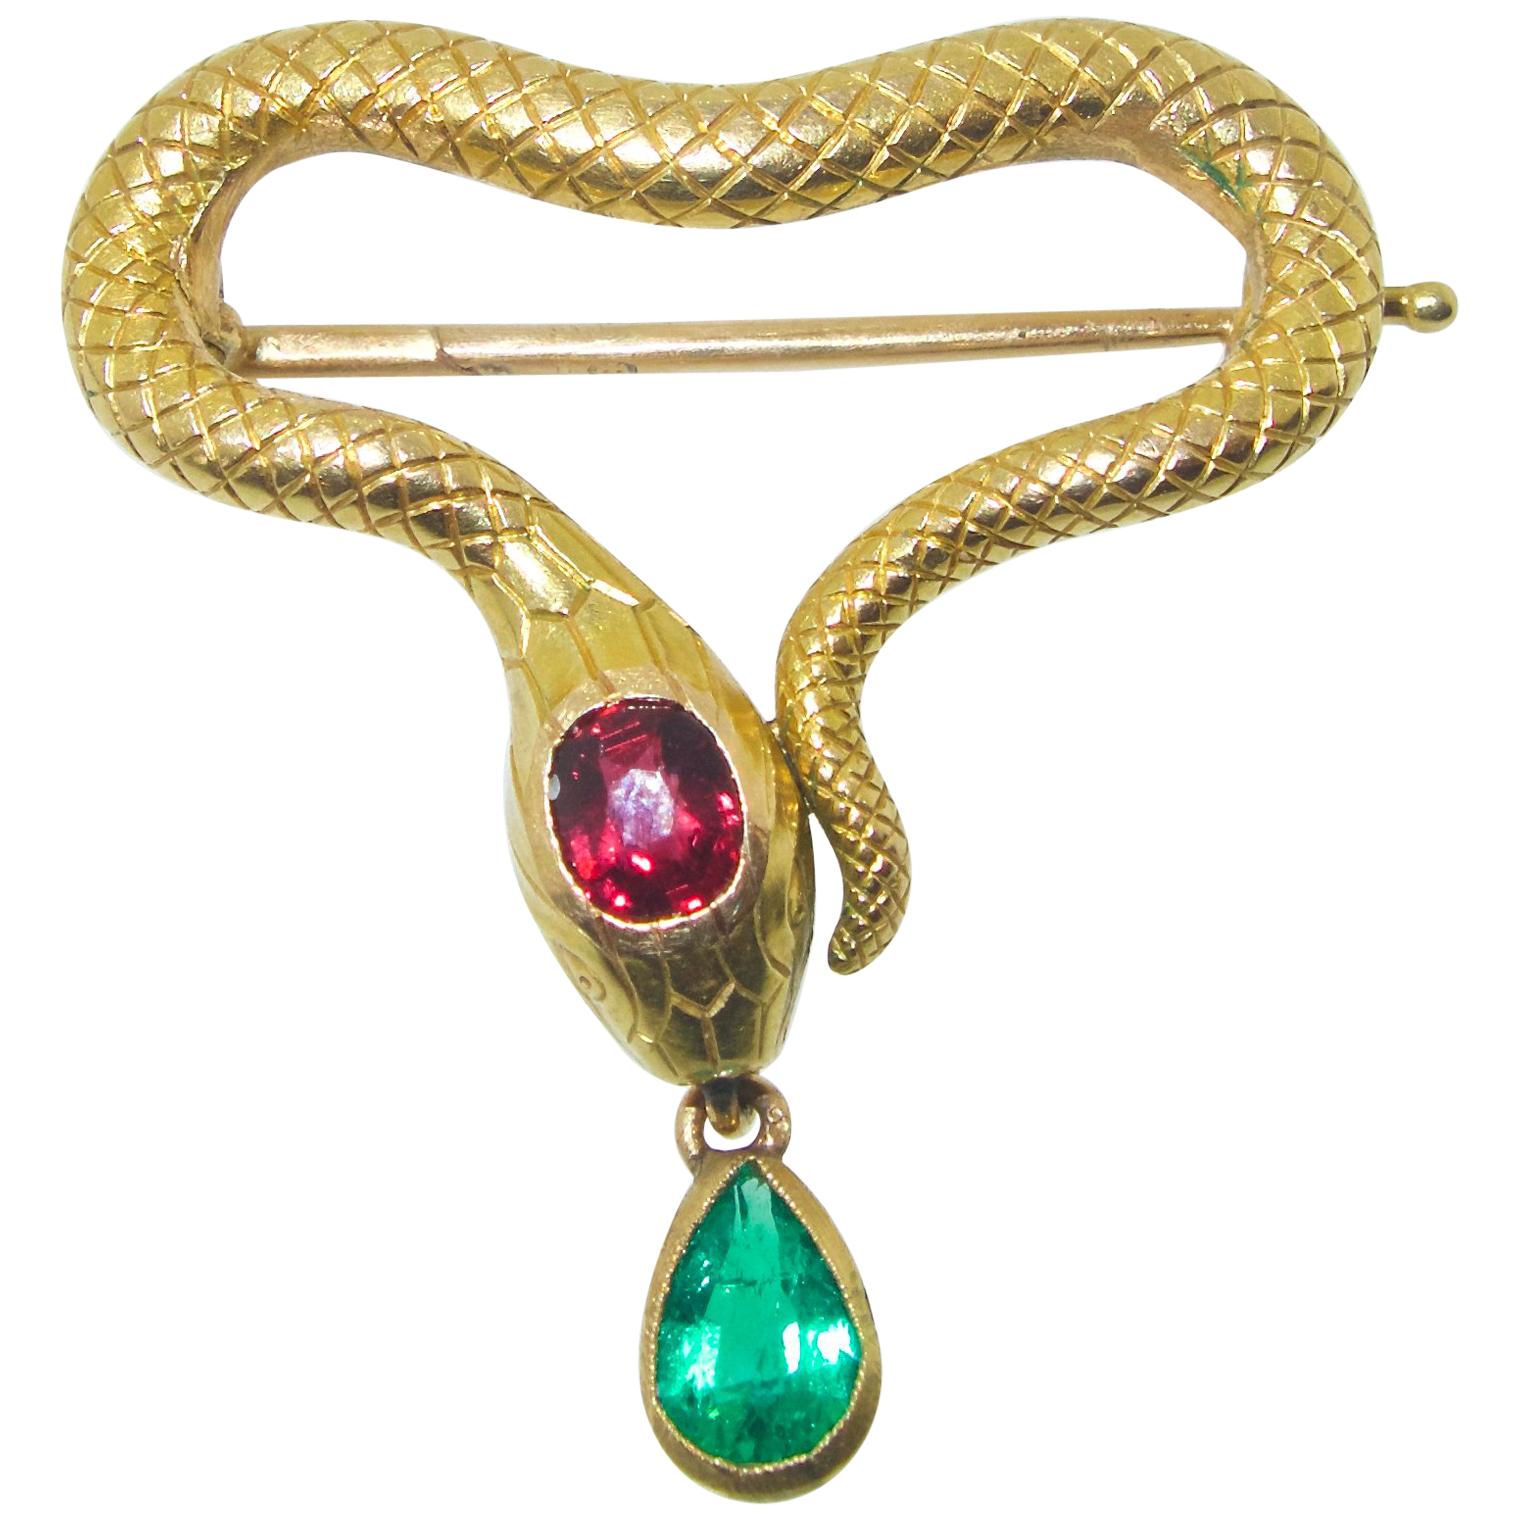 Russian Ruby and Emerald Serpent Brooch by K. Faberge, Moscow, circa 1900